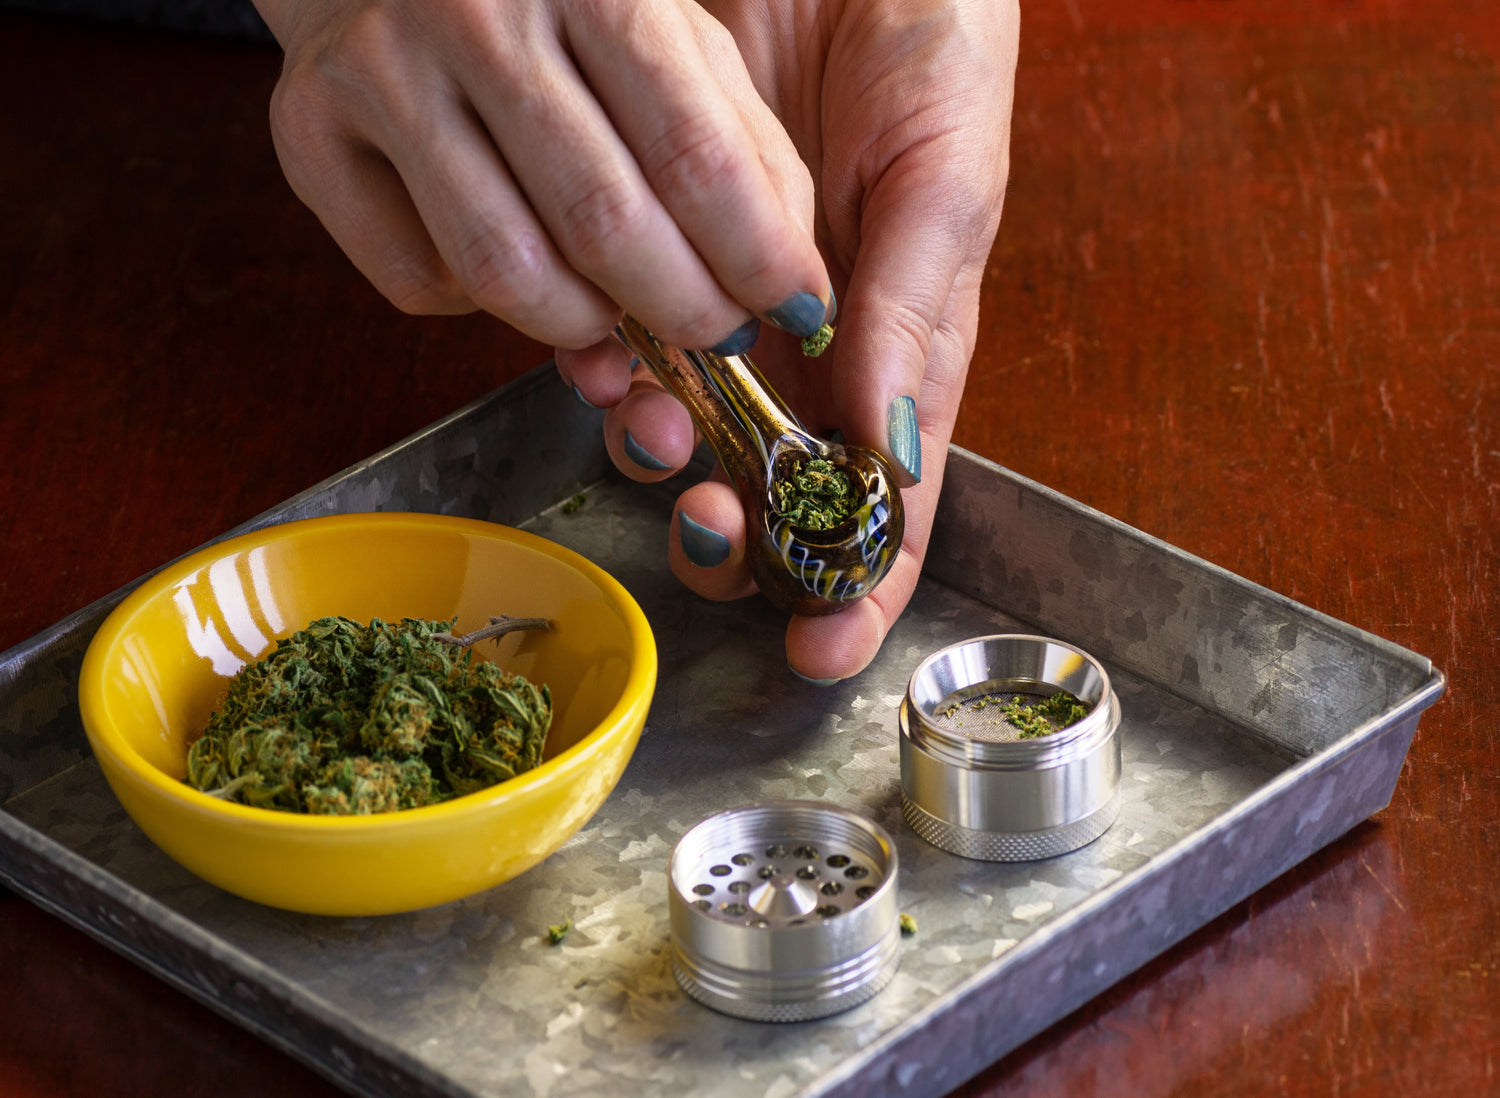 How to Pack & Smoke a Bowl or Pipe of Weed